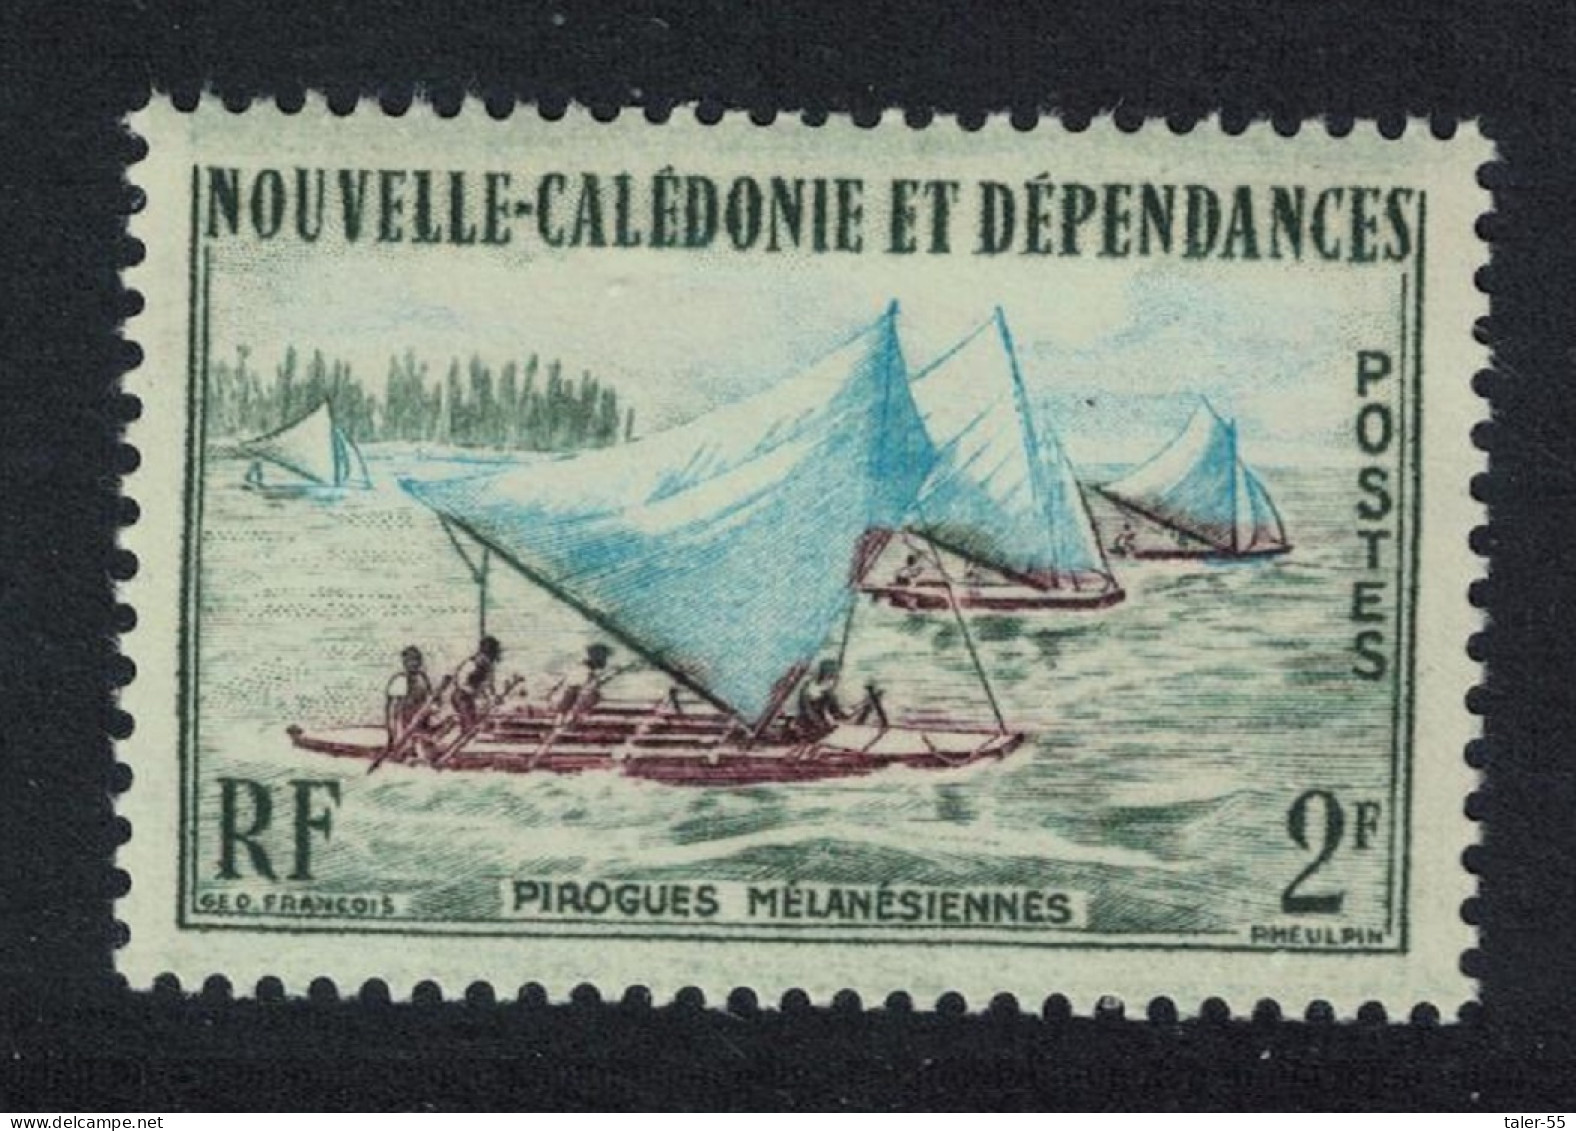 New Caledonia Outrigger Canoes Racing 2f 1959 MNH SG#345 - Unused Stamps